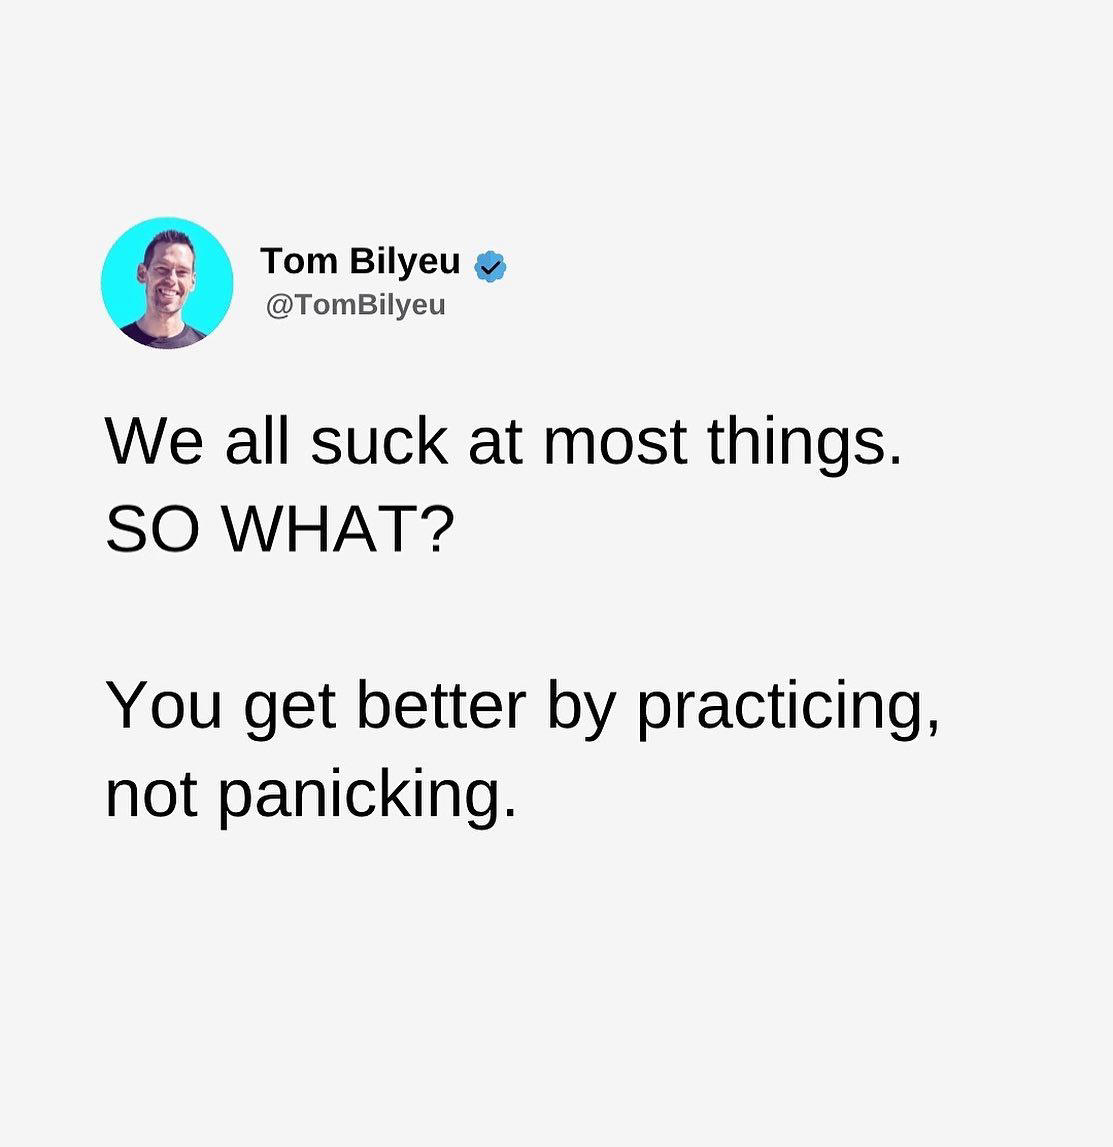 What are you practicing and getting better at